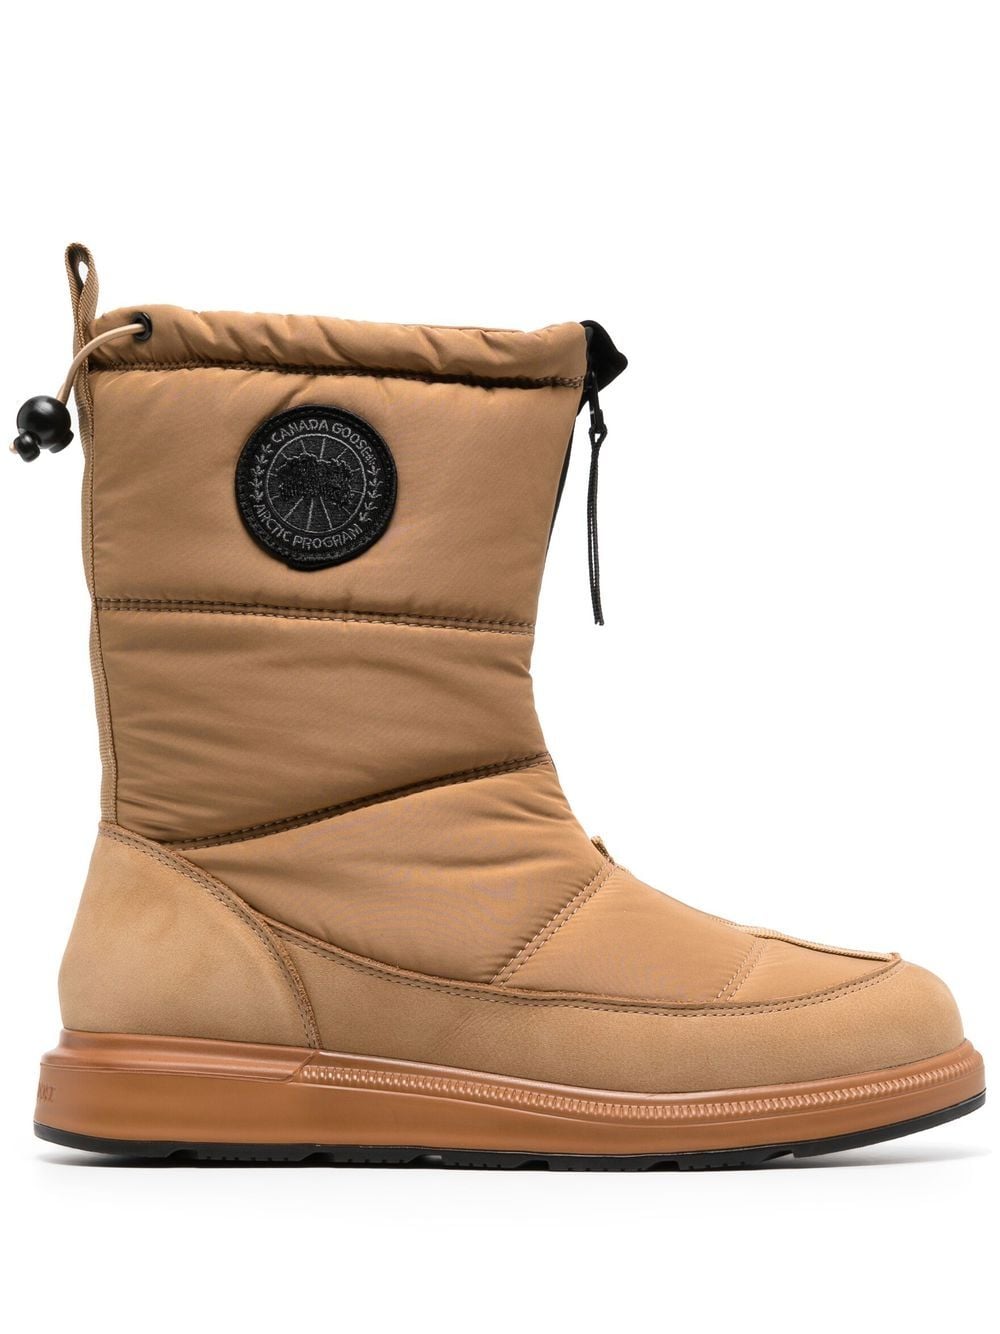 CANADA GOOSE CROFTON PADDED ANKLE BOOTS